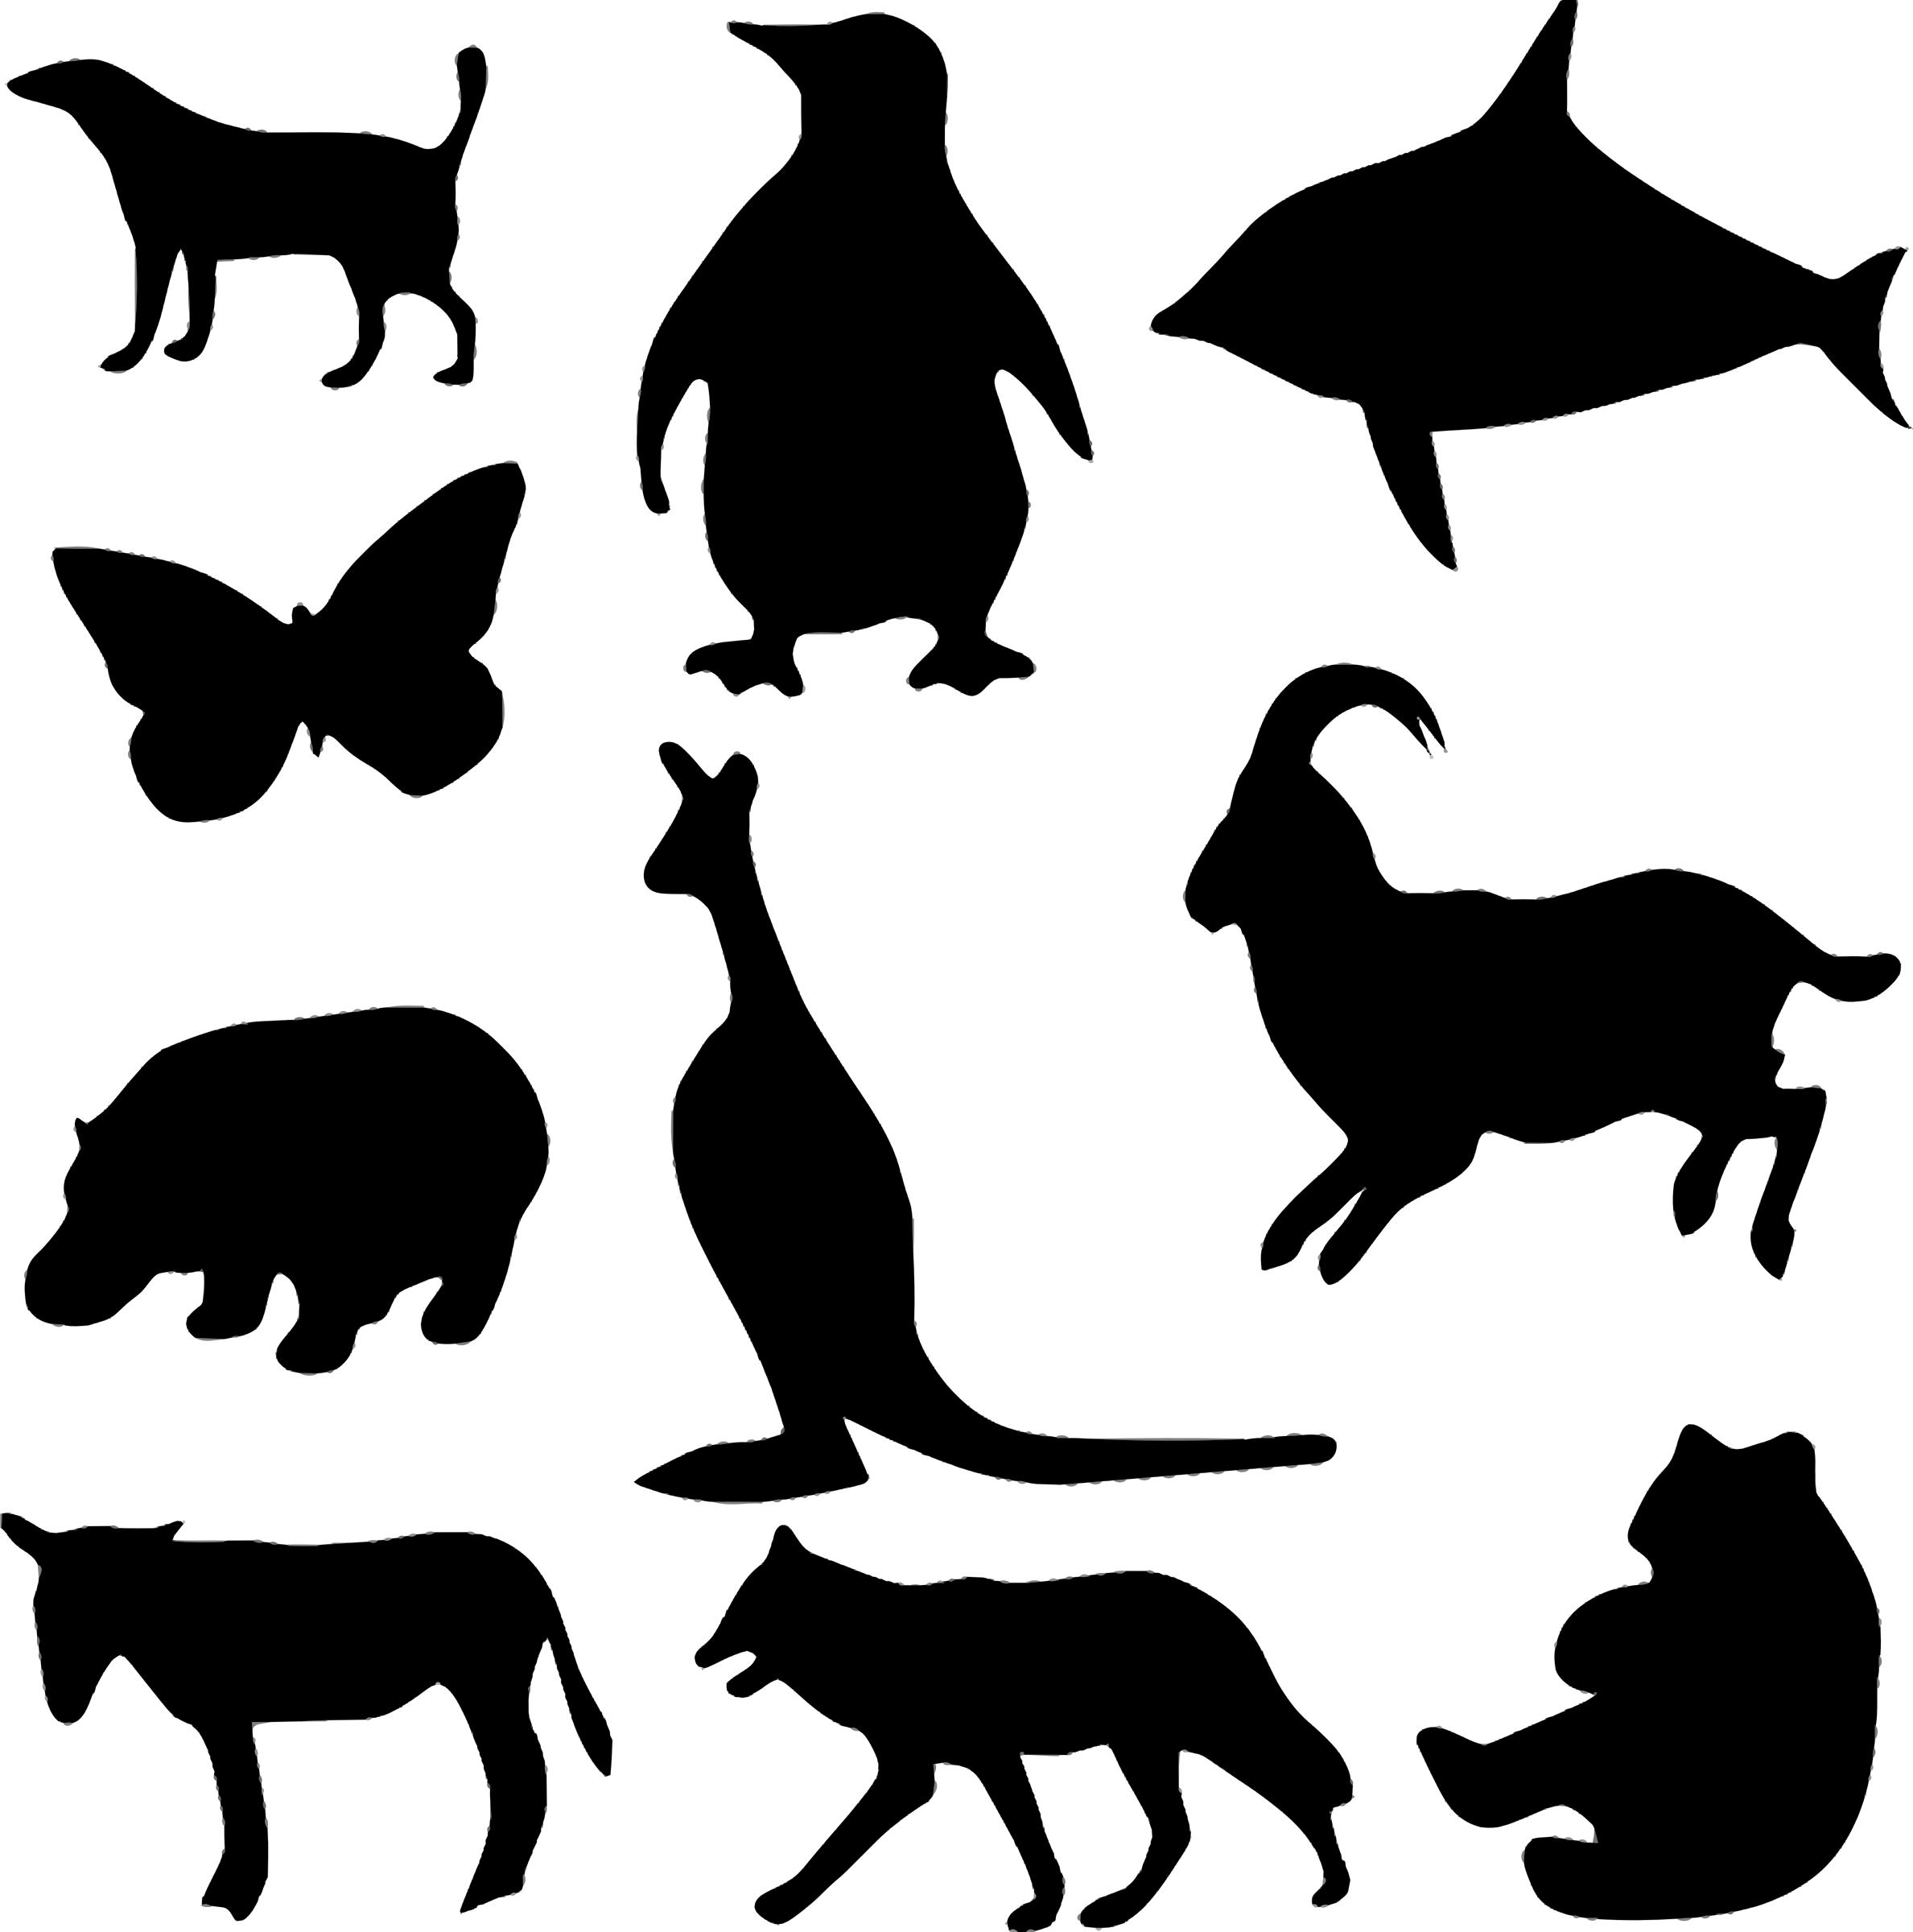 Animal silhouettes 1 PNG icons